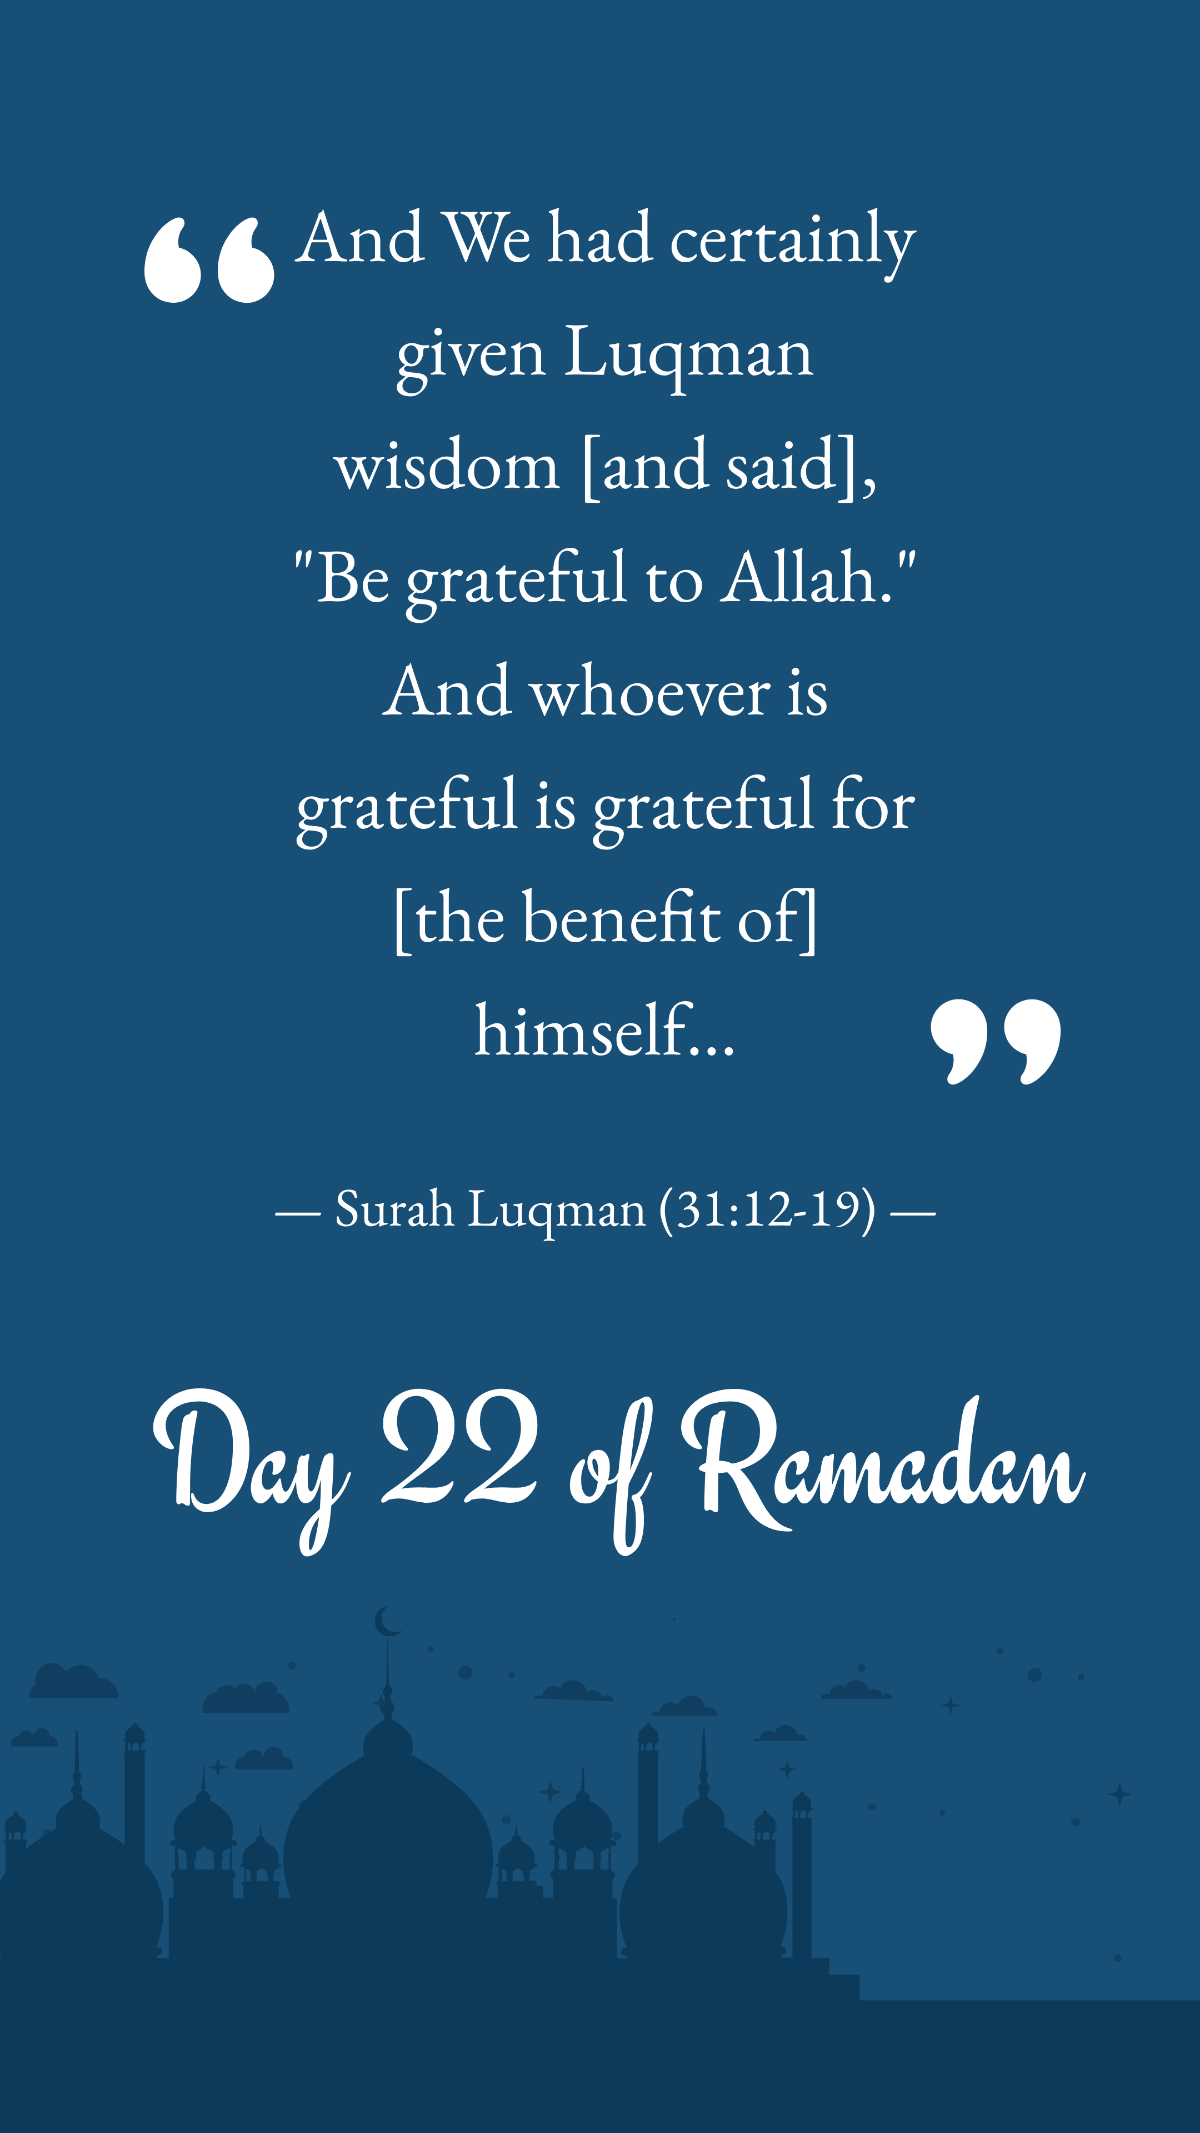 Ramadan Day 22 Quote Template